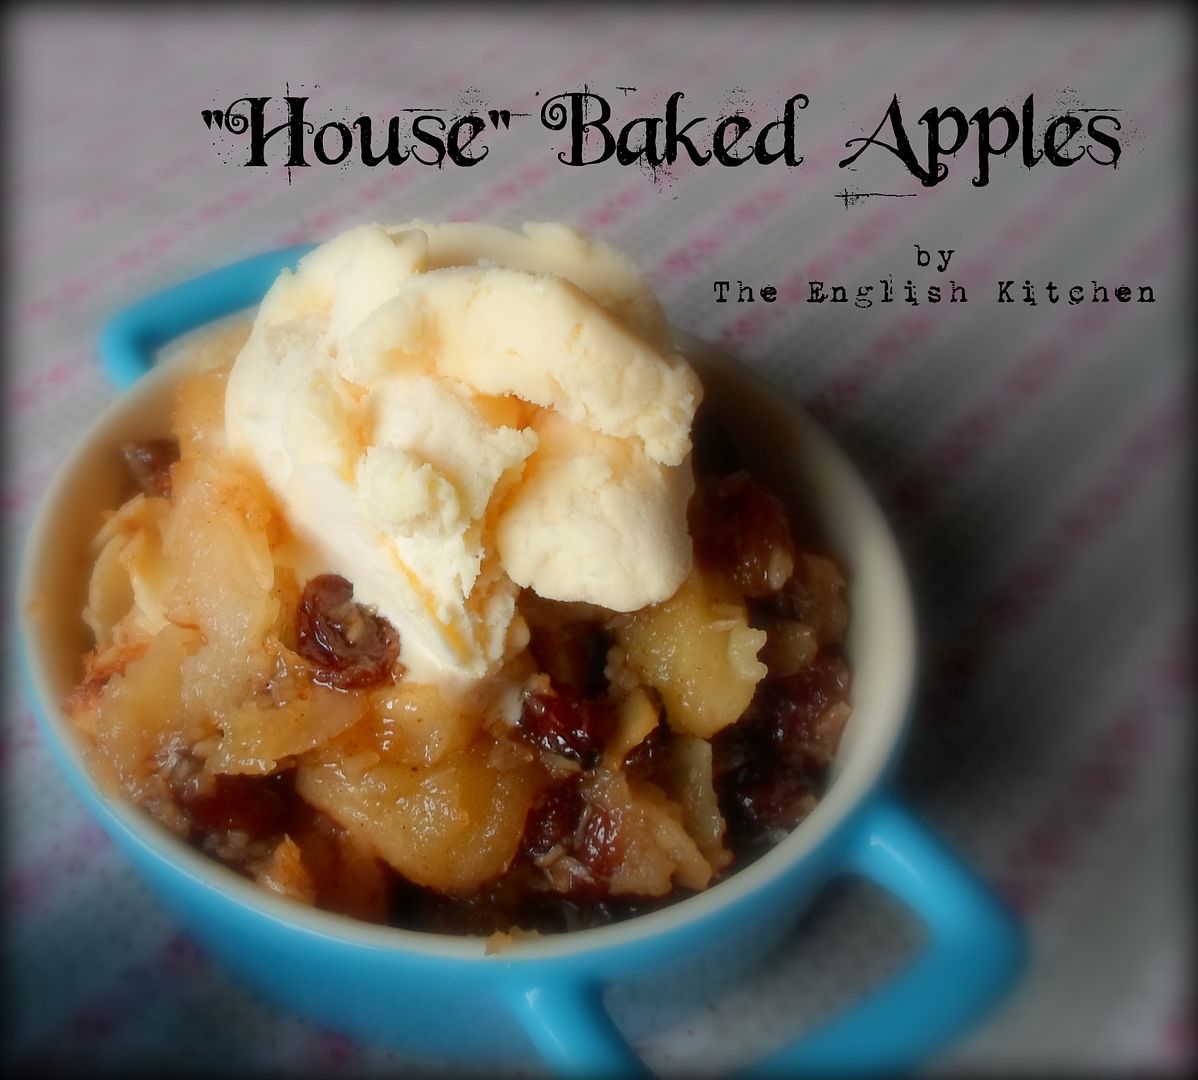 "House" Baked Apples